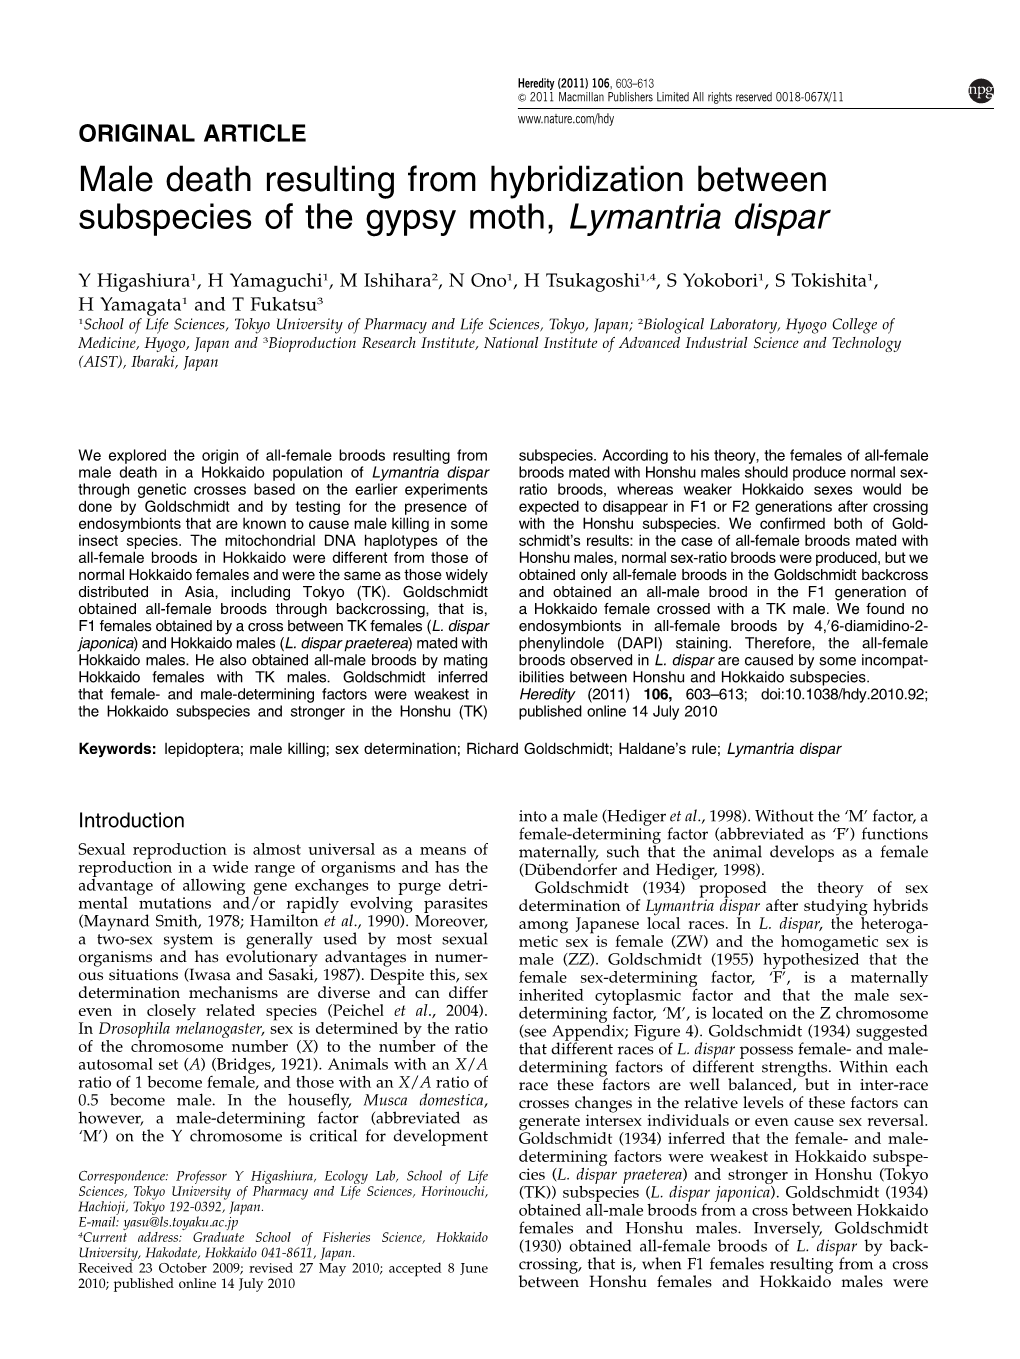 Male Death Resulting from Hybridization Between Subspecies of the Gypsy Moth, Lymantria Dispar